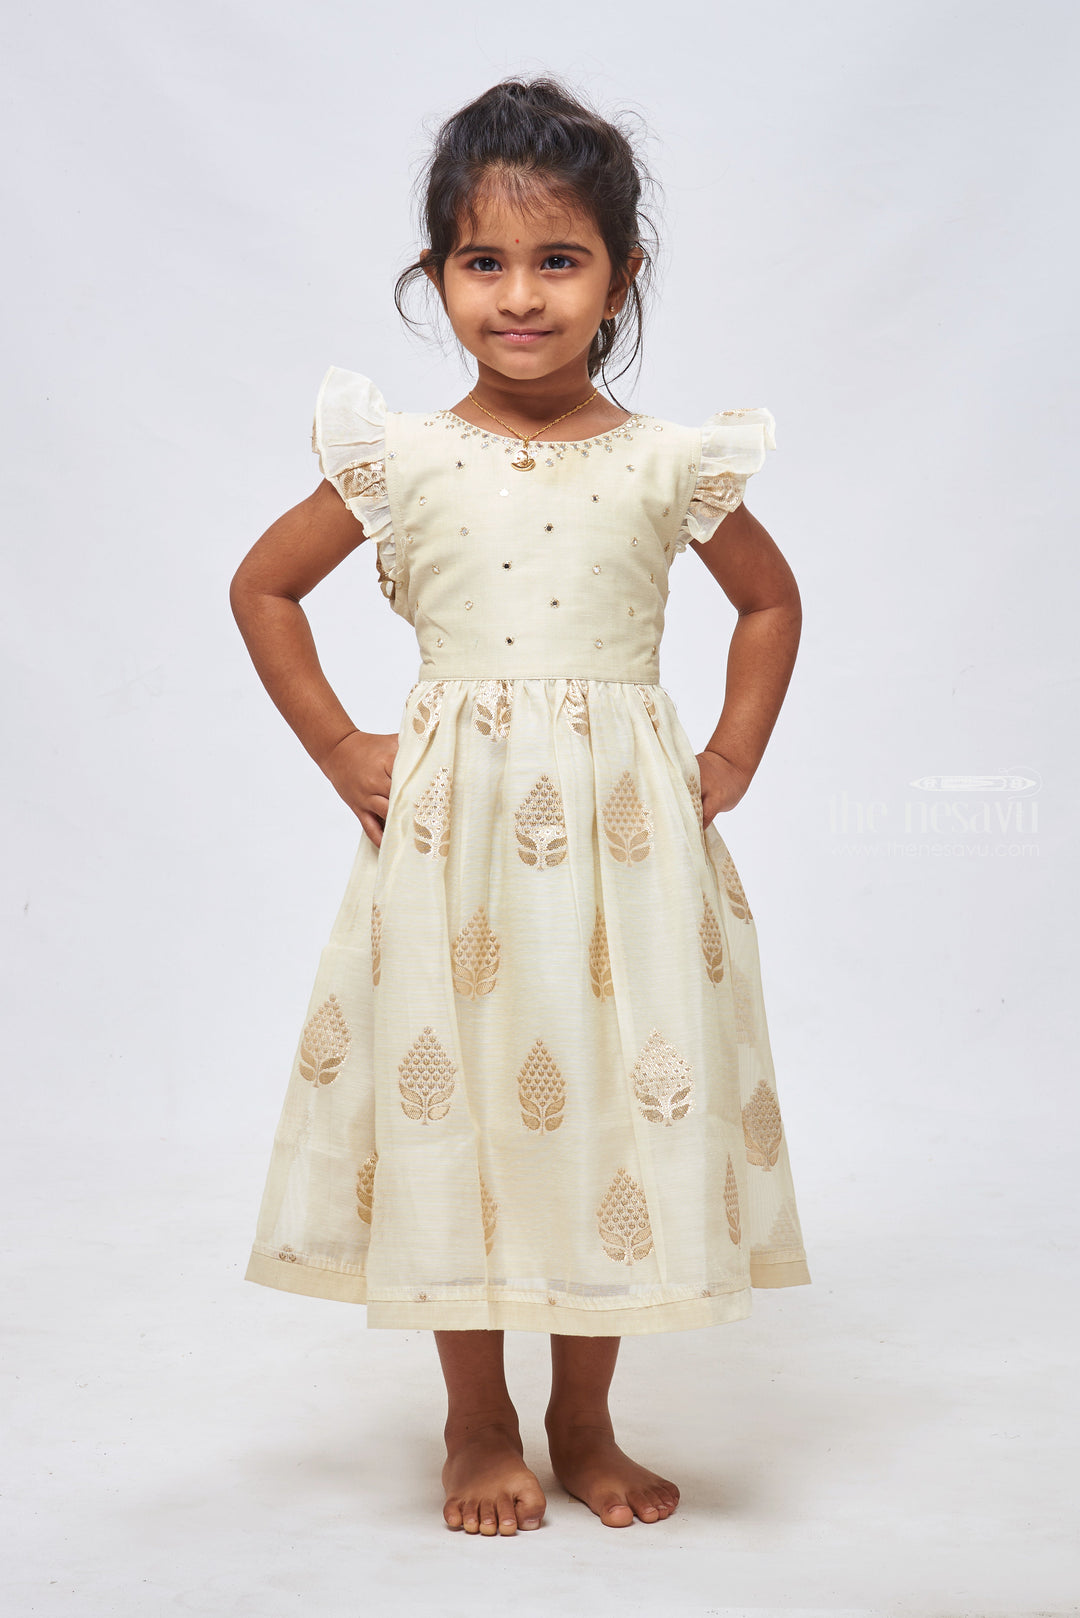 The Nesavu Girls Cotton Frock Half White Butta Beauty: Faux Mirror Embroidered Designer Chanderi Frock for Girls Nesavu 16 (1Y) / Half white / Chanderi GFC1142A-16 Designer Kids Frock | Faux Mirror Embroidered Chanderi - Perfect for Special Occasions | the Nesavu